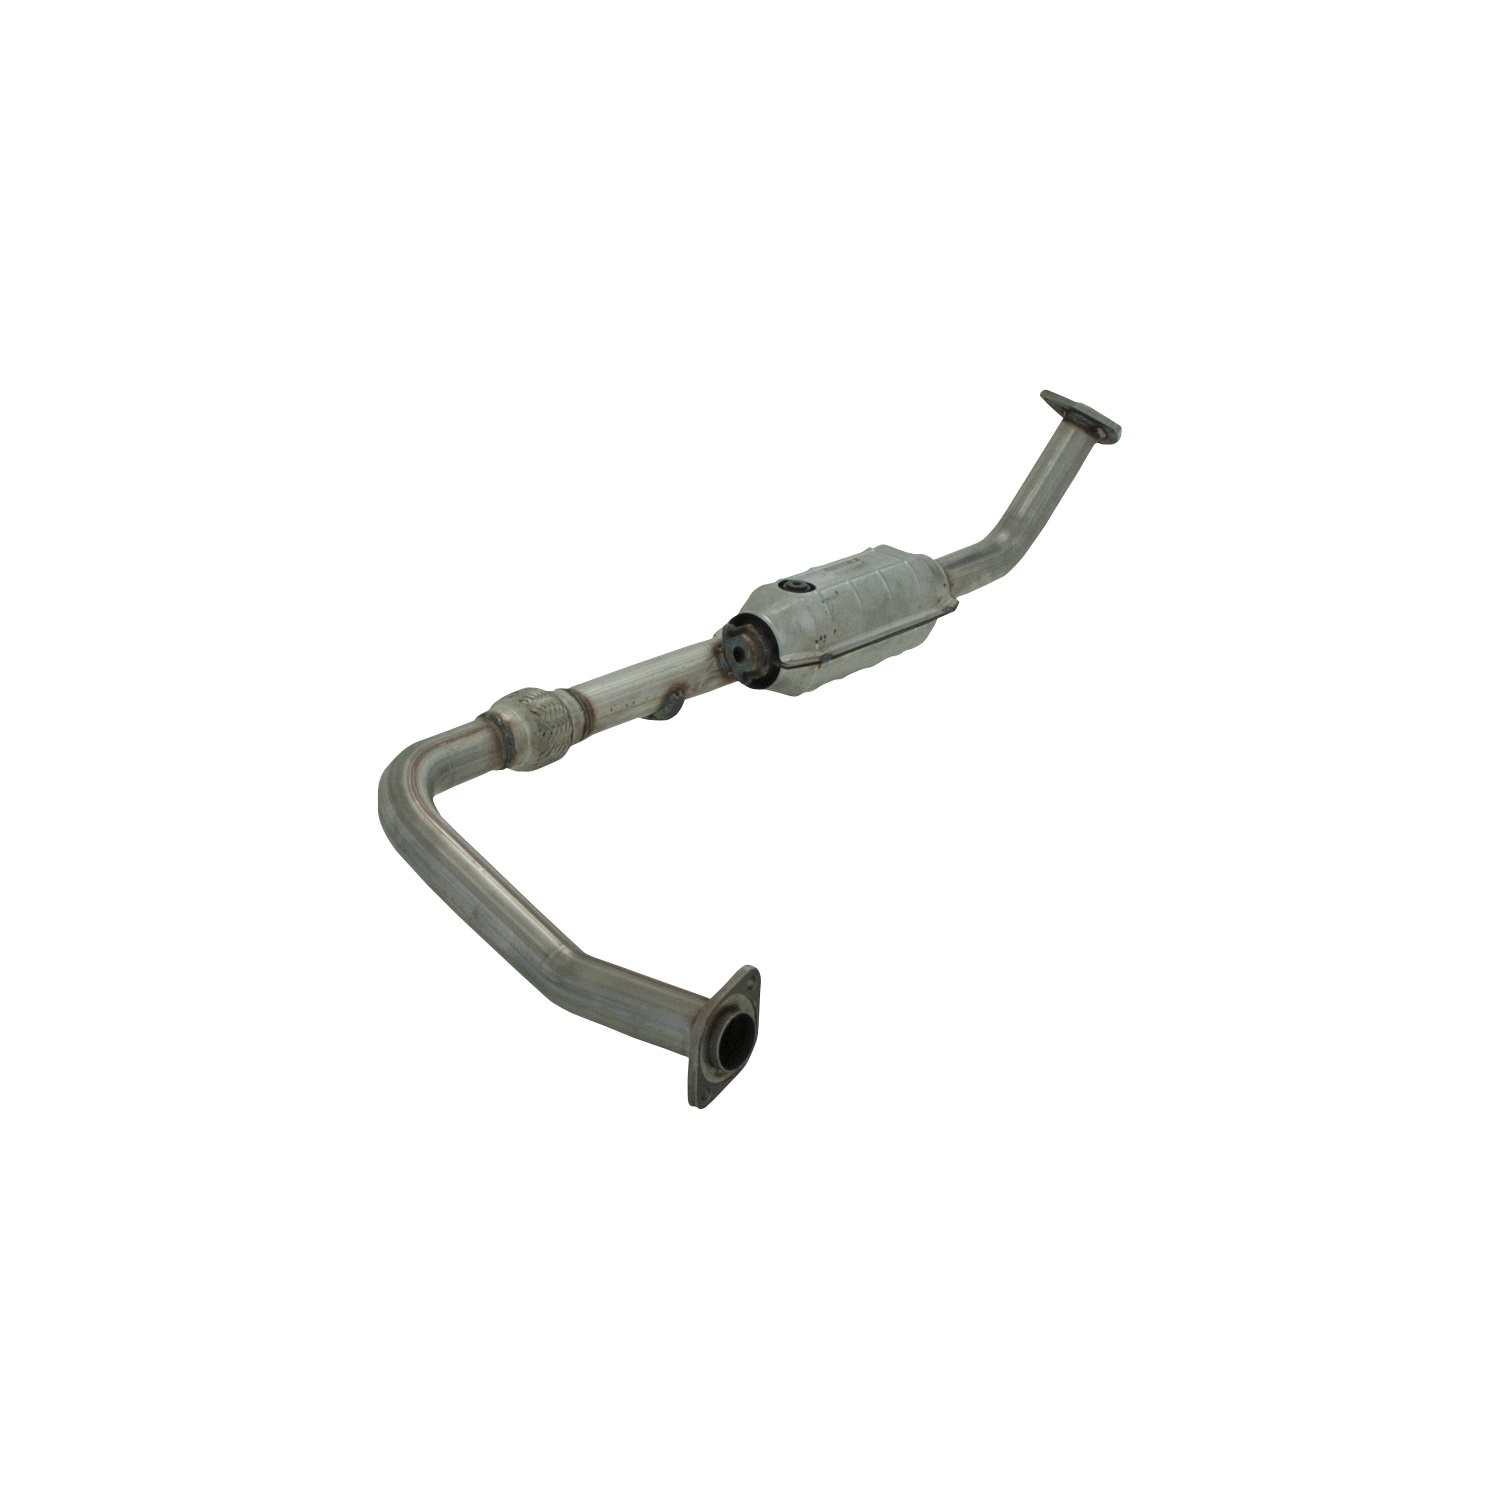 Flowmaster Flowmaster 2050006 Direct Fit Catalytic Converter Fits 00-04 Tundra